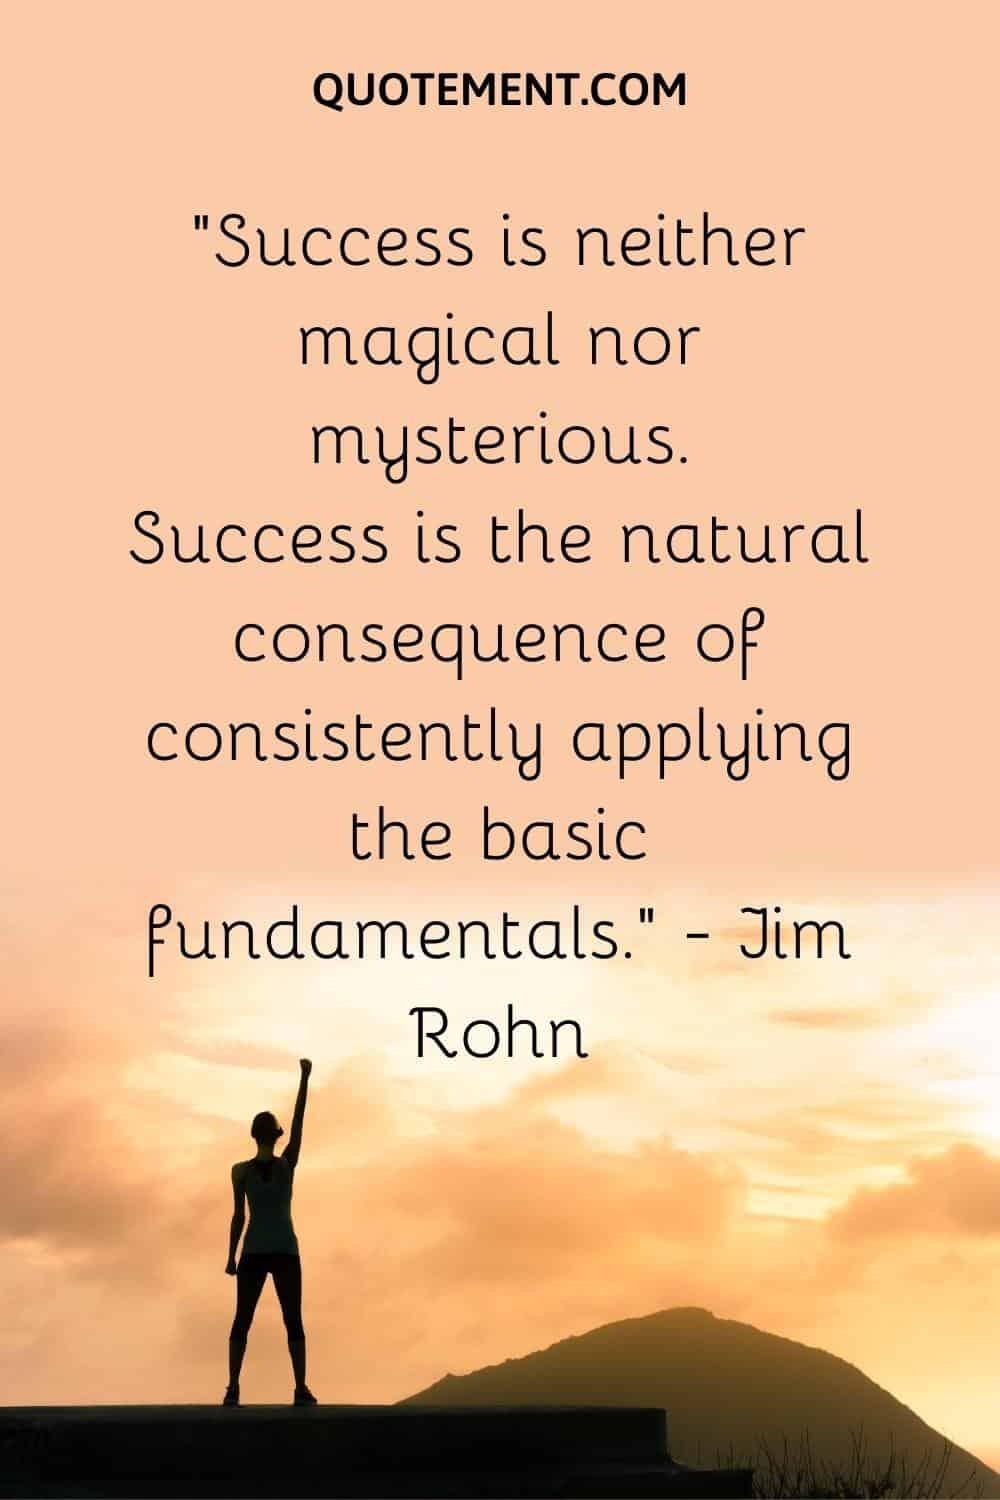 Success is neither magical nor mysterious